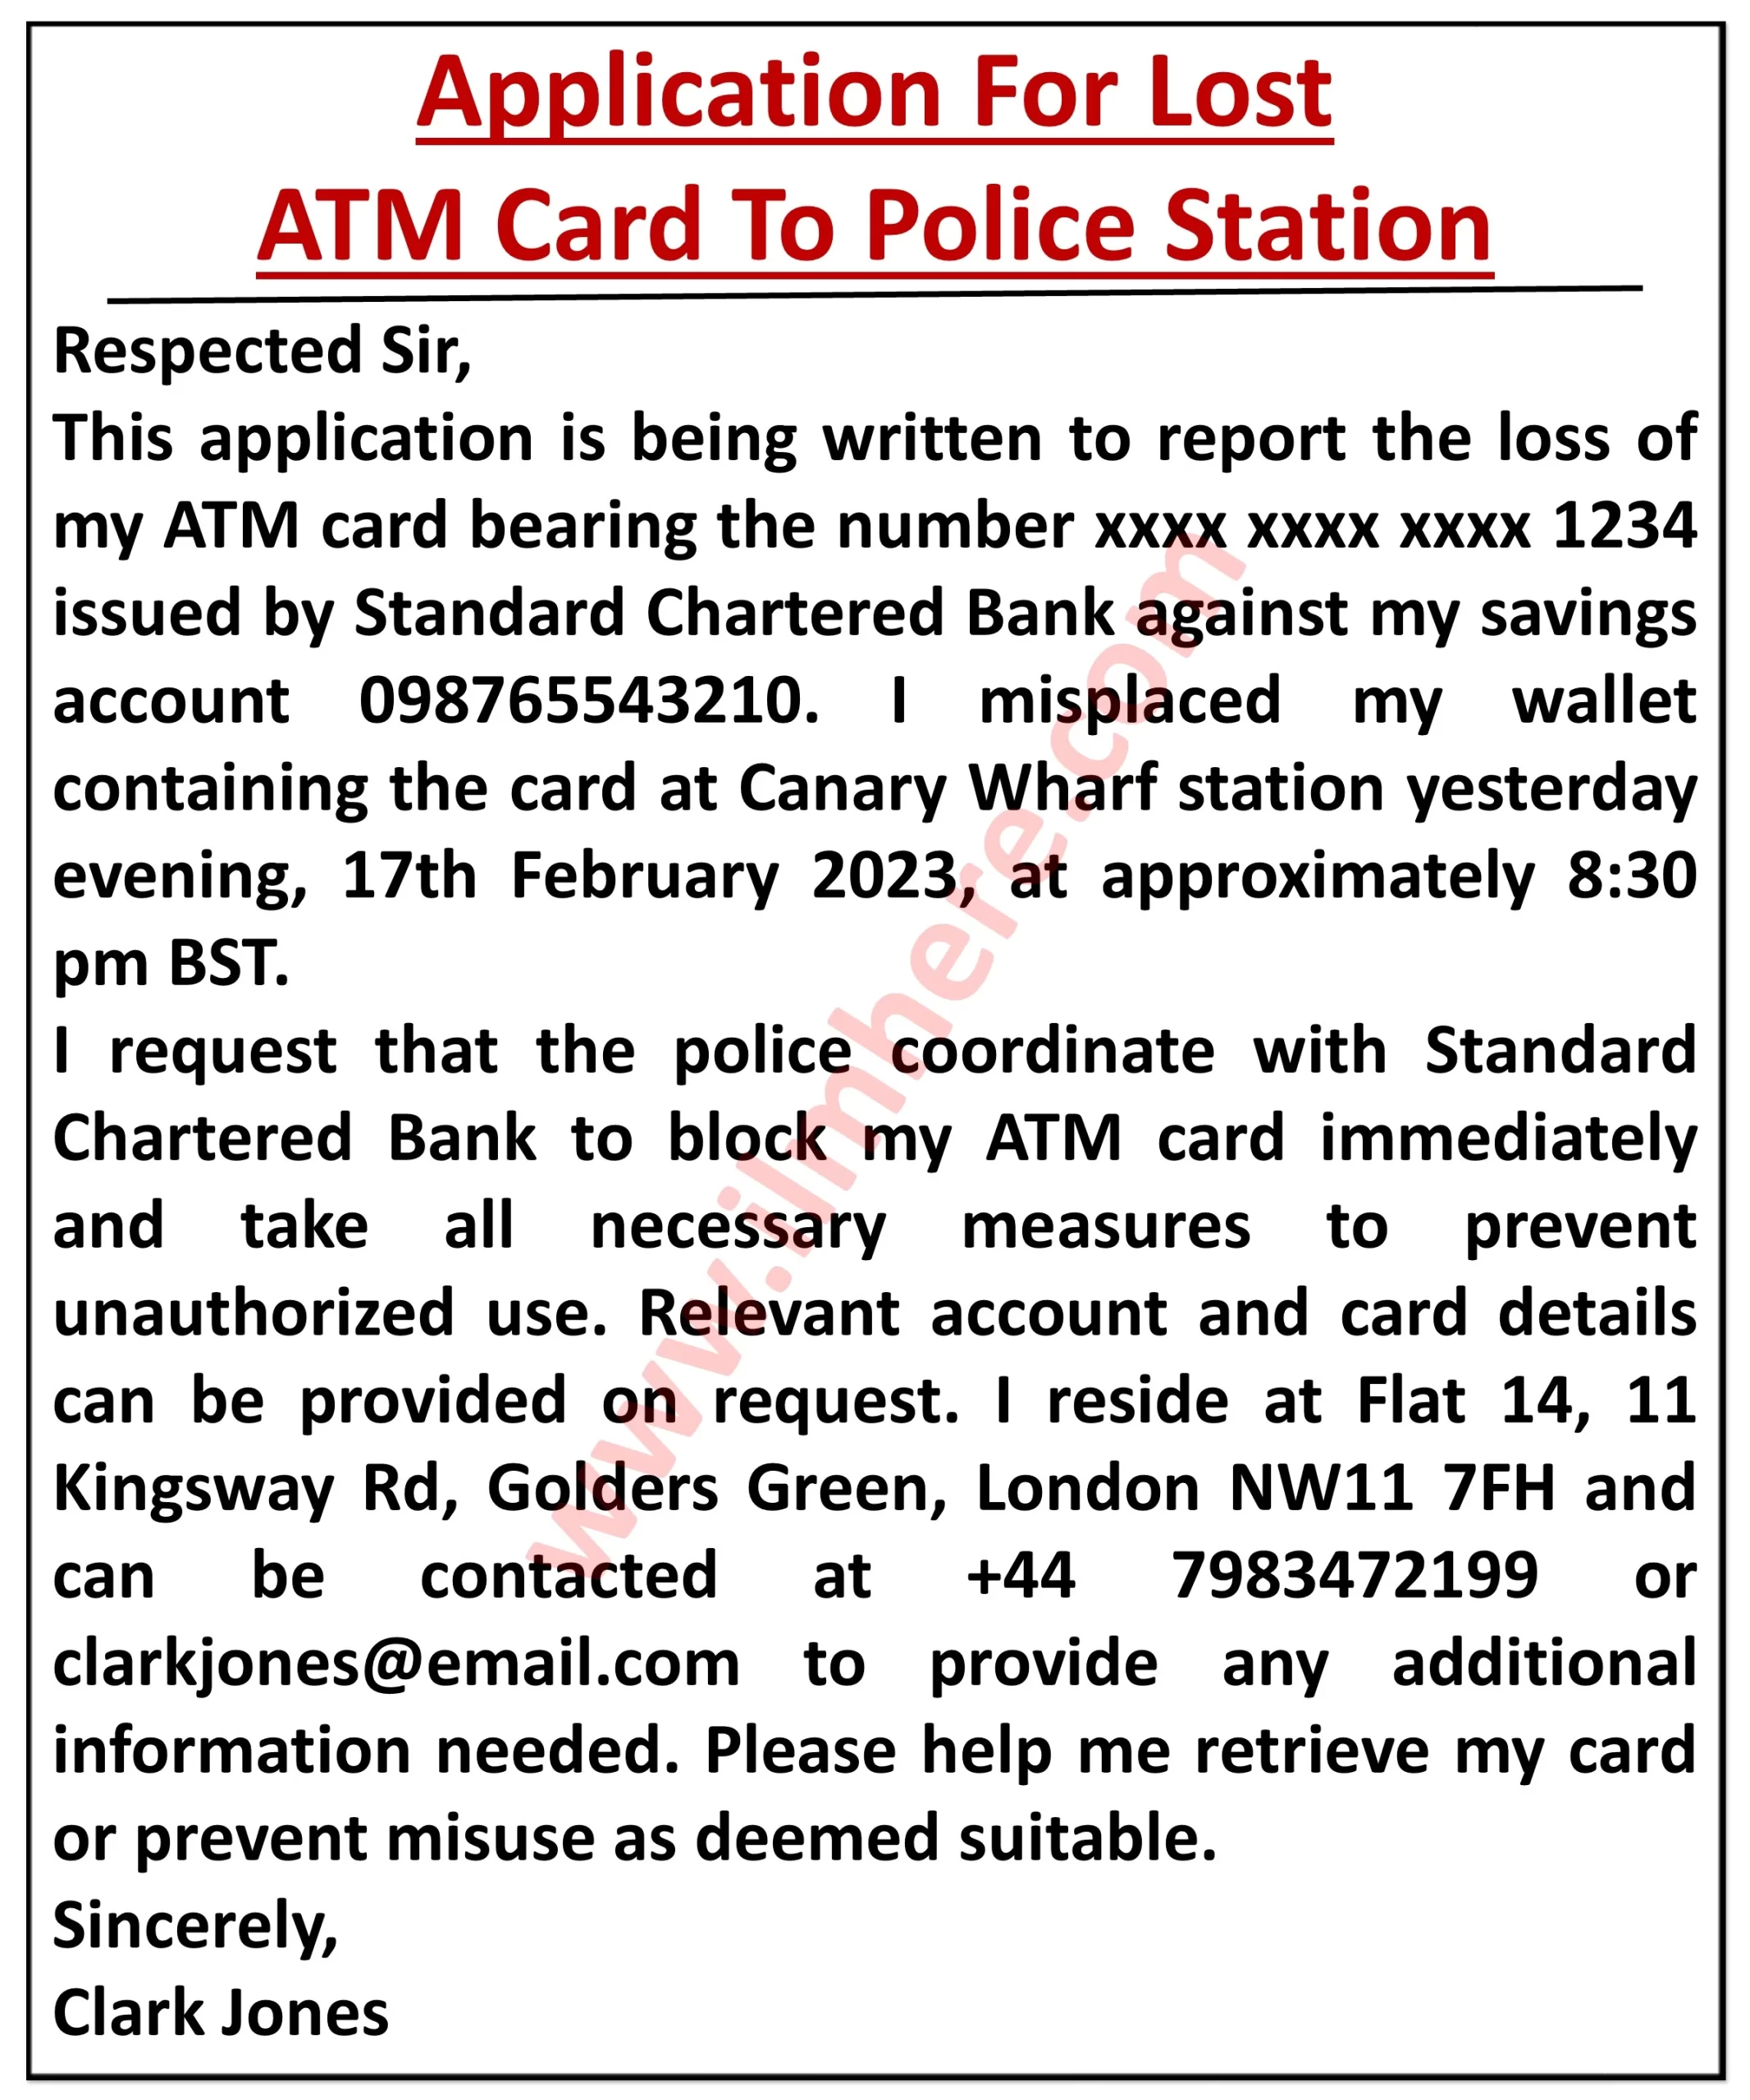 Application For Lost ATM Card At Police Station - 1